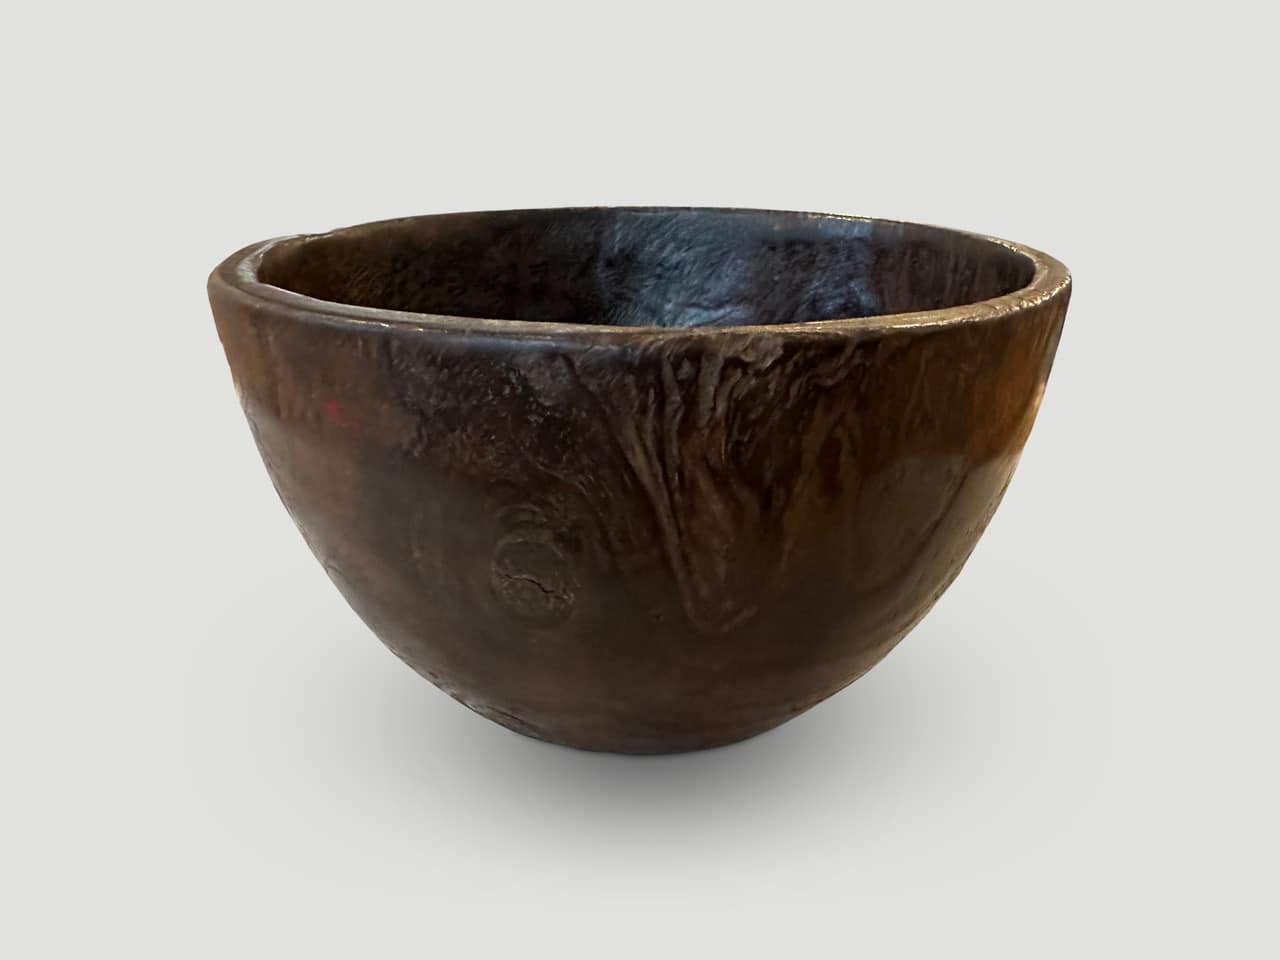 Beautiful antique bowl hand carved from a single piece of teak wood